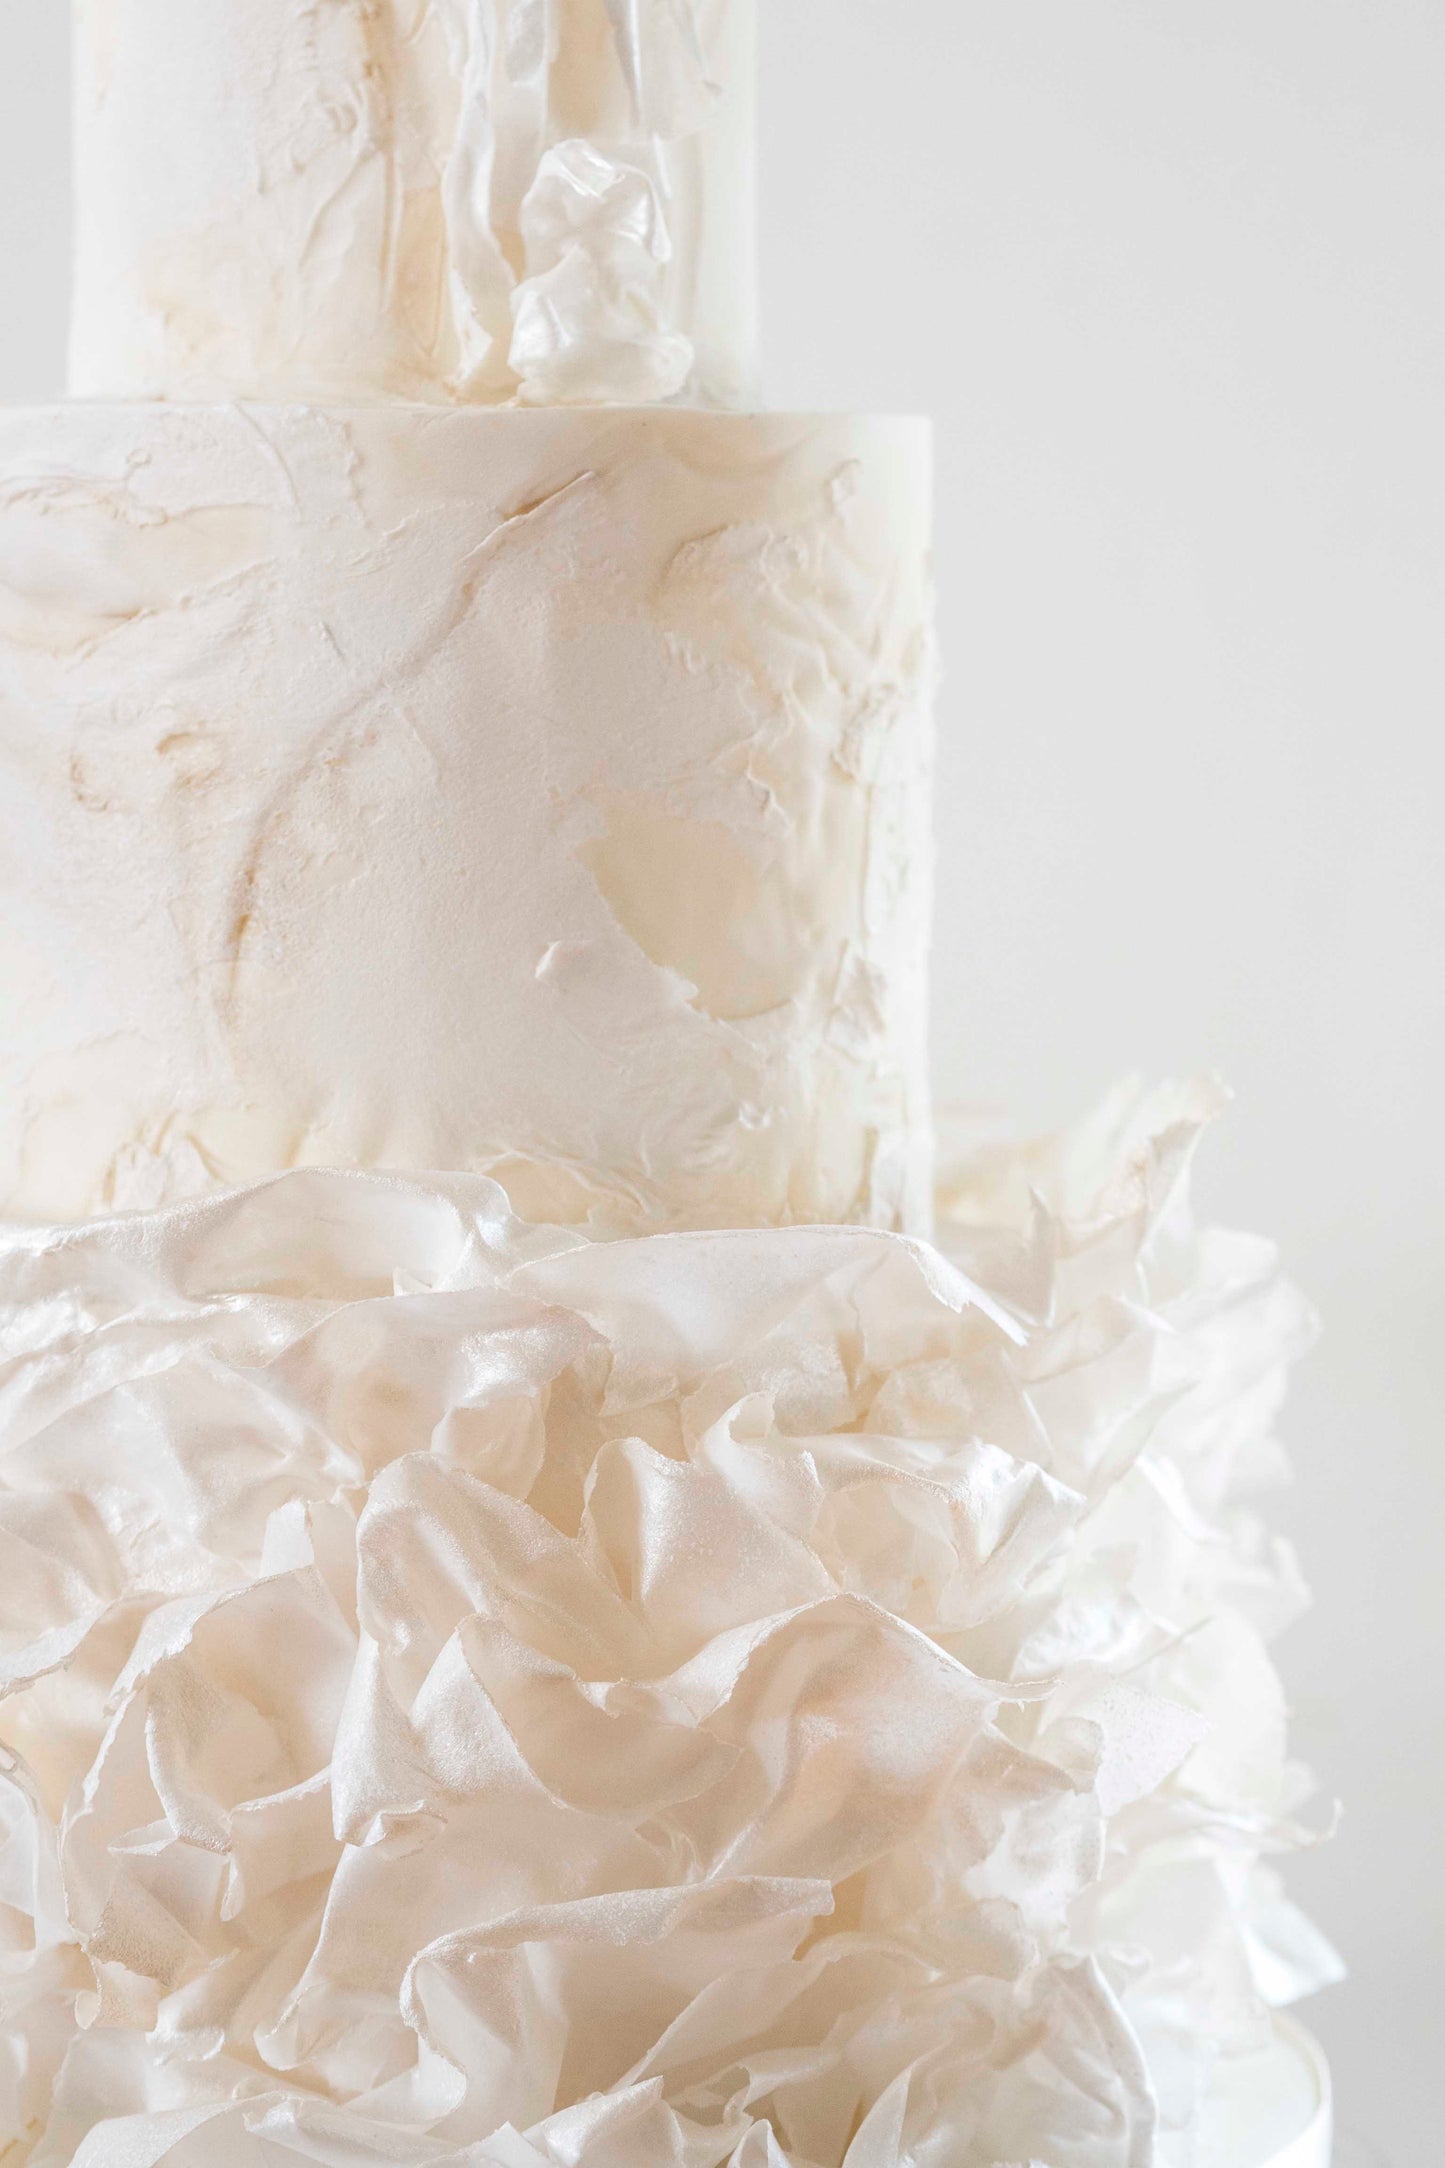 Contemporary wedding cake with modern ruffle, textured finish and dreamy ethereal look